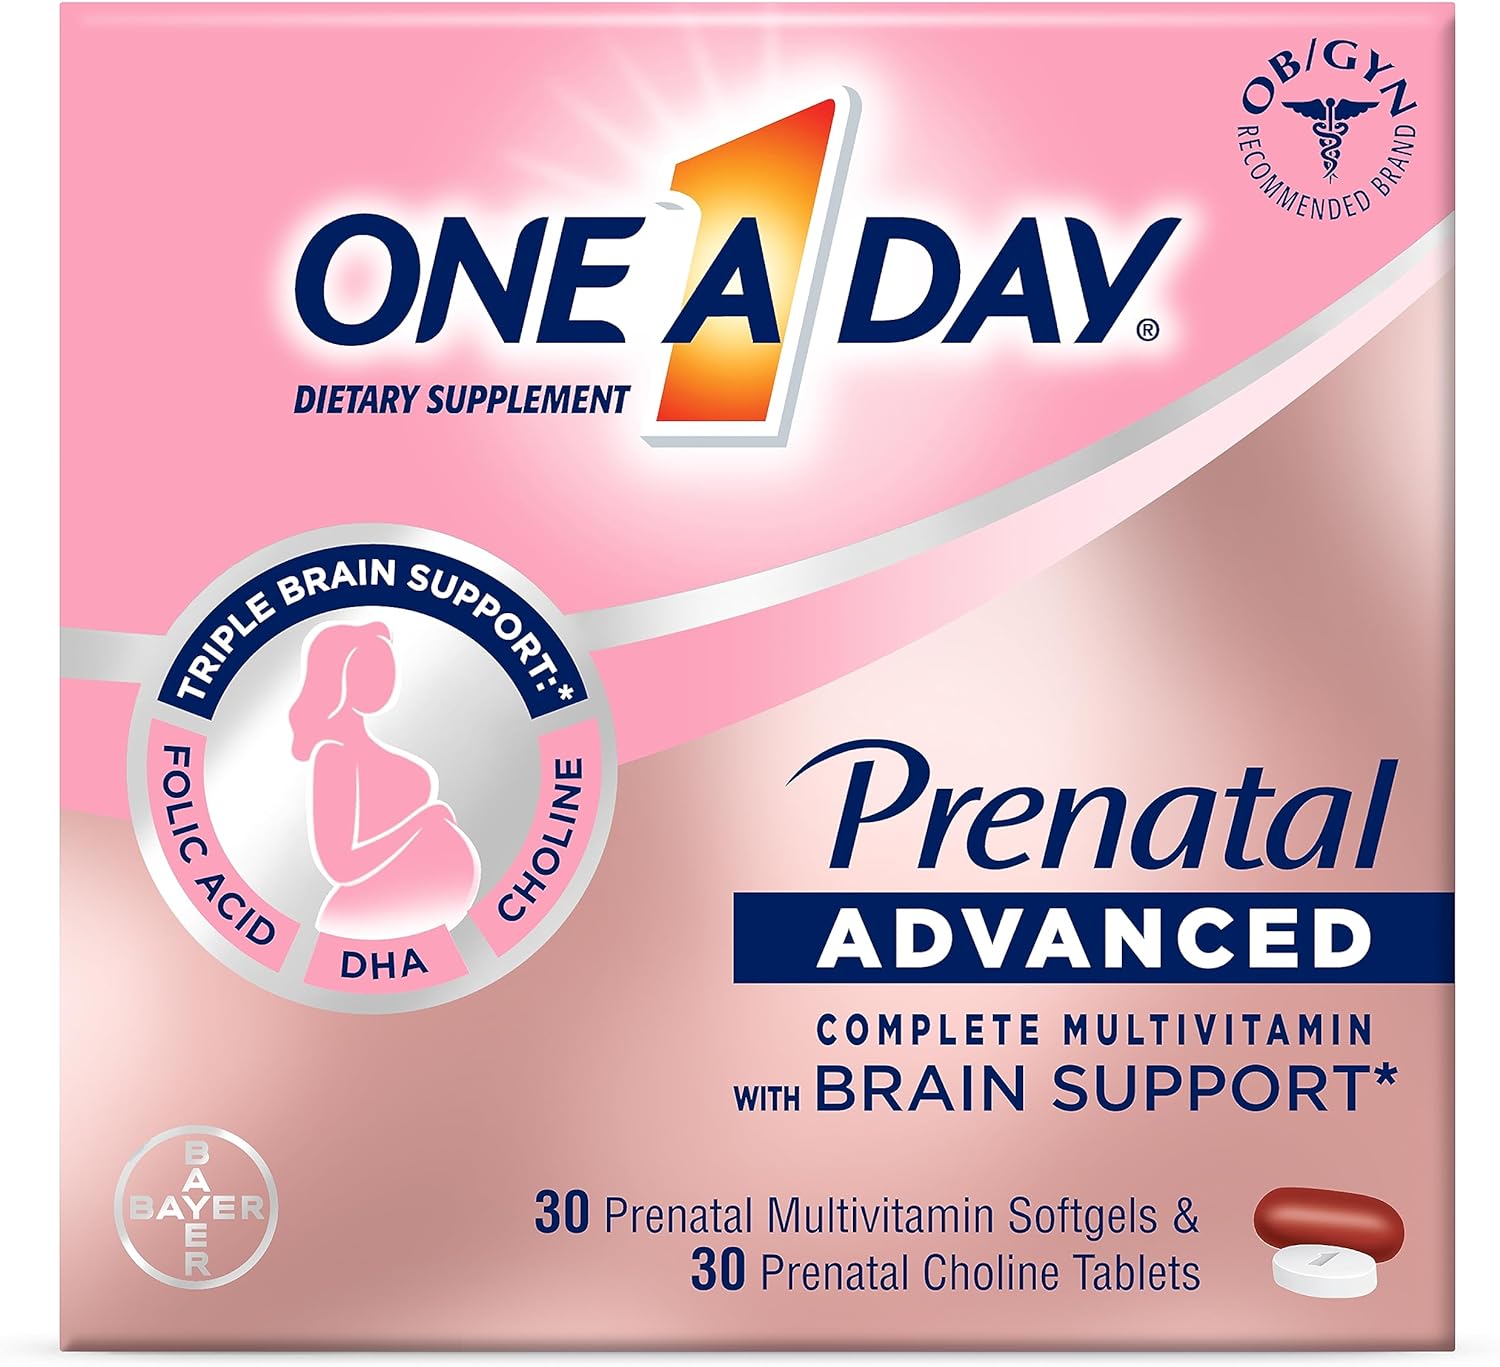 One A Day Womens Prenatal Advanced Complete Multivitamin with Brain Support* with Choline, Folic Acid, Omega-3 DHA  Iron for Pre, During and Post Pregnancy, 30+30 Count (60 Count Total Set)